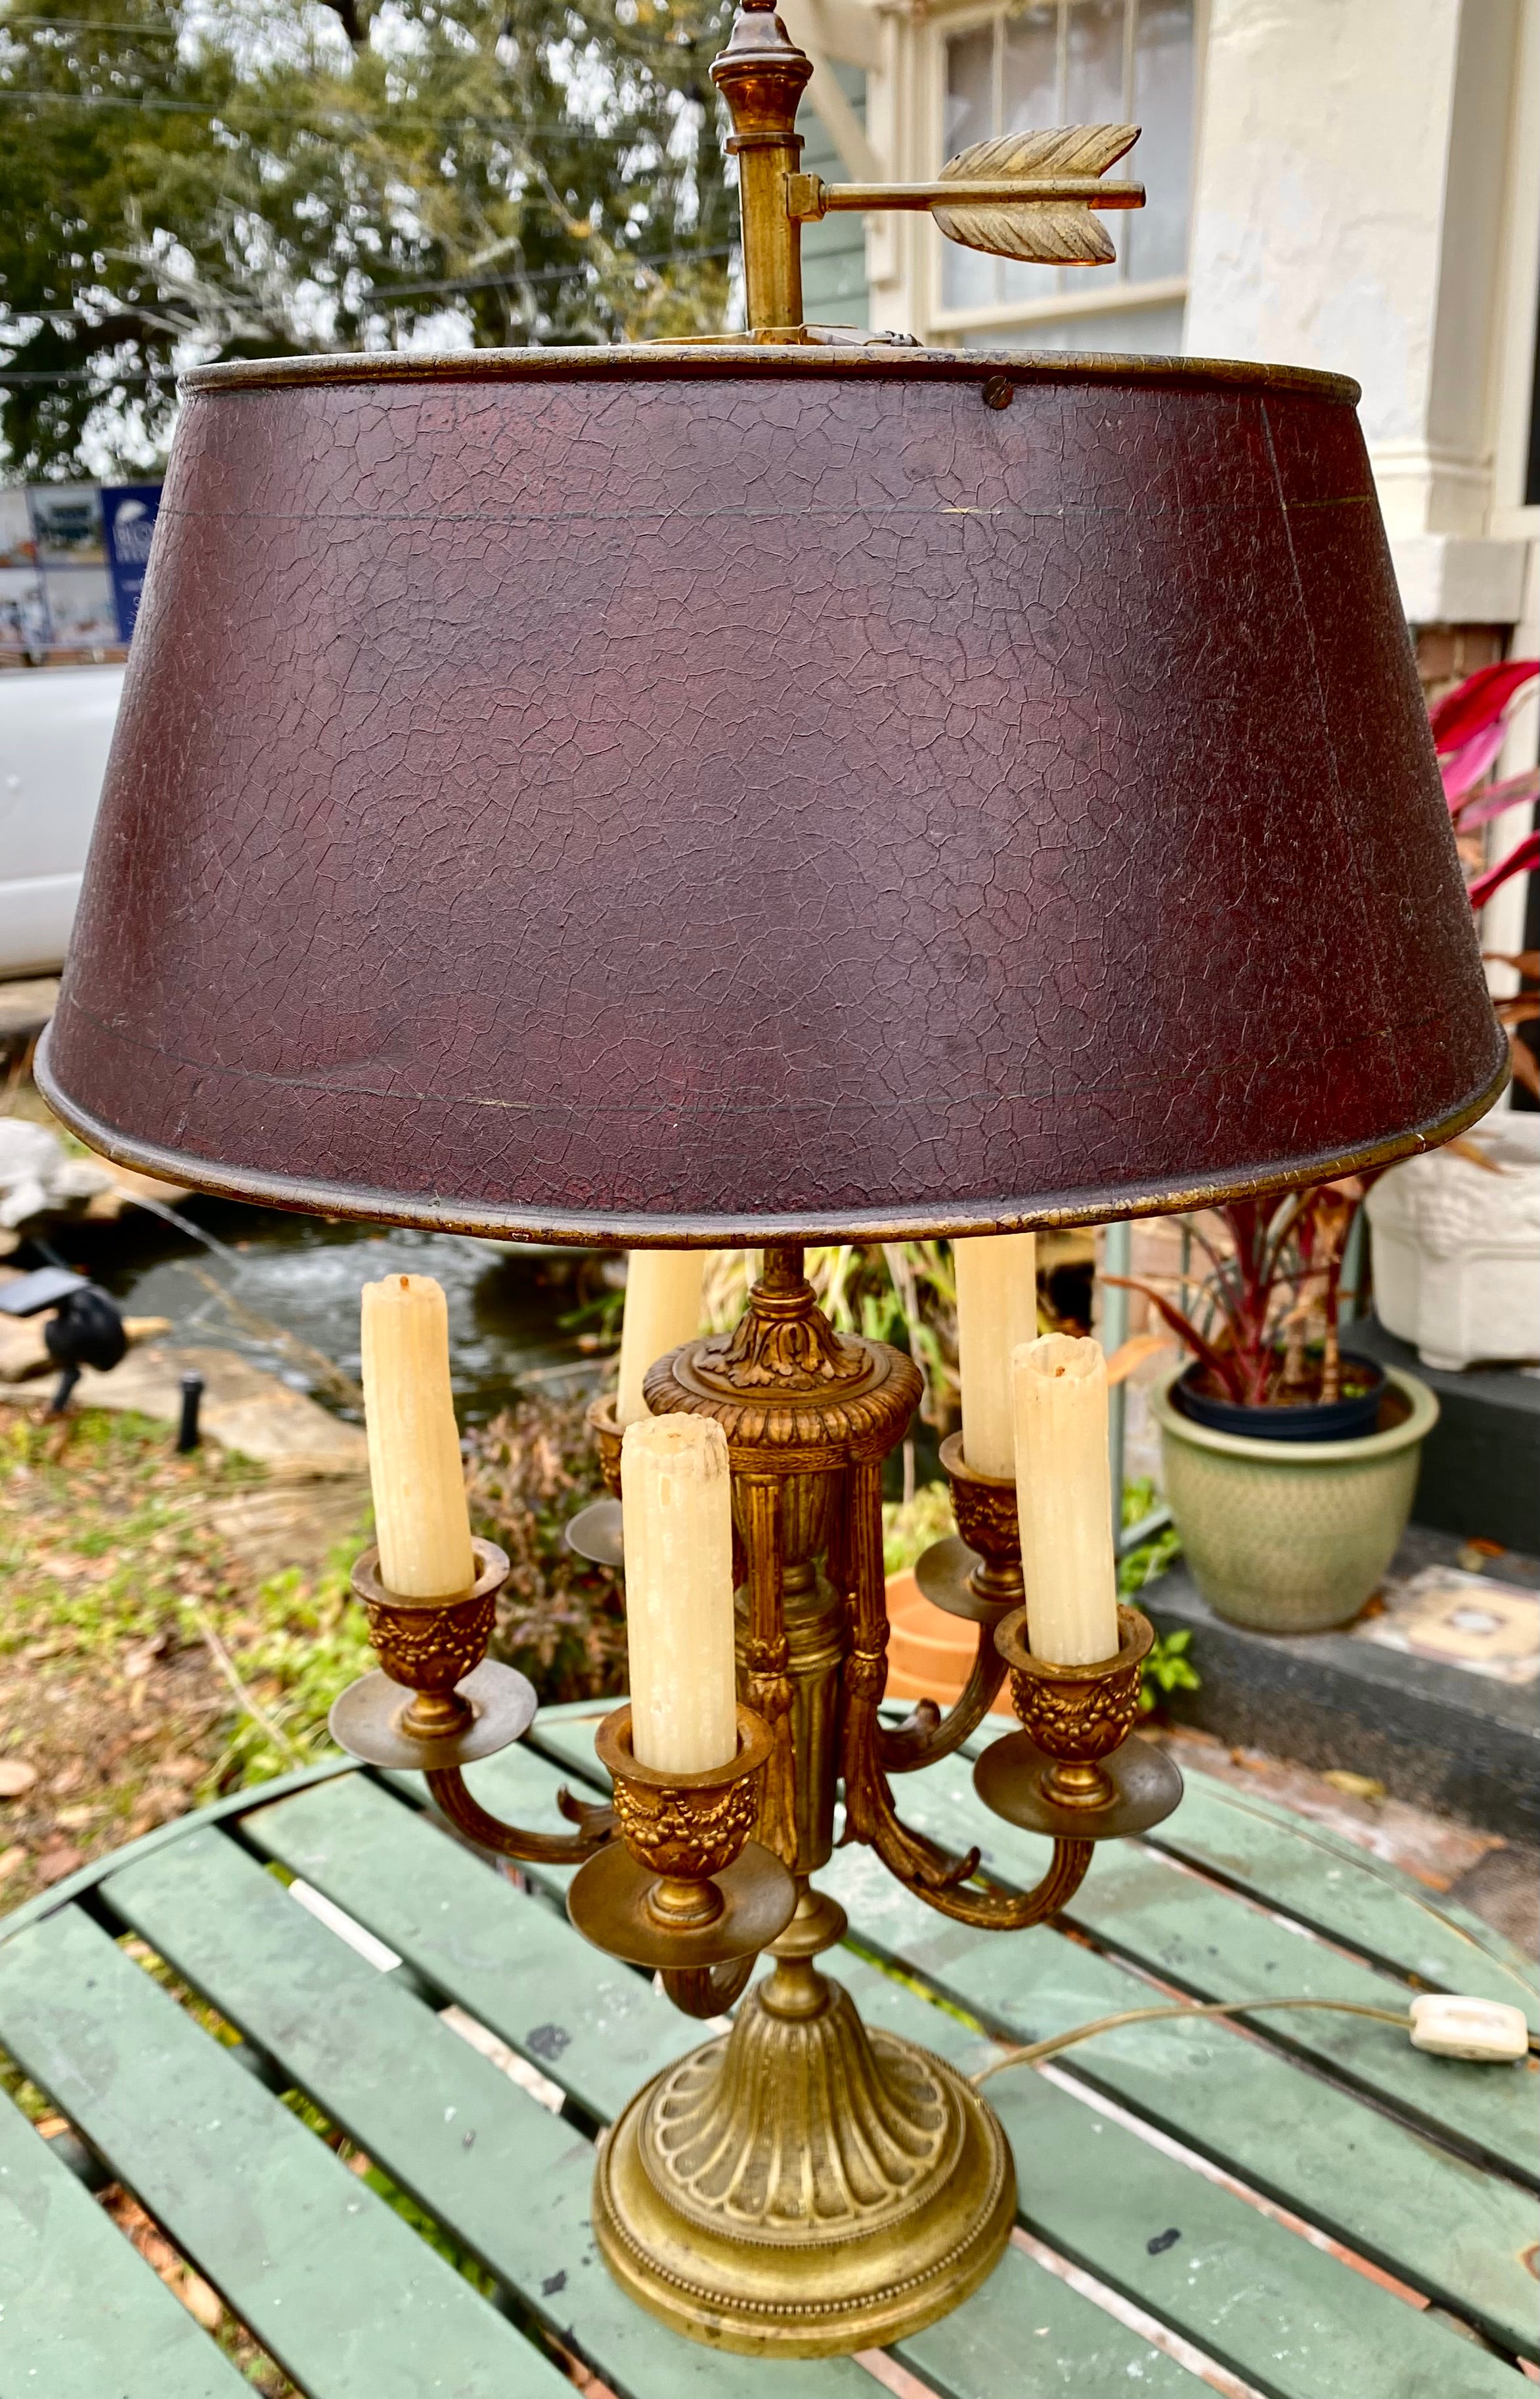 French Louie XVI style gilt bronze bouilotte table lamp featuring a tall, detailed cylindrical stem crowned by an arrow finial over a deep brown/burgundy tole conical shade concealing five S-form light sockets, followed by five foliat U-shaped